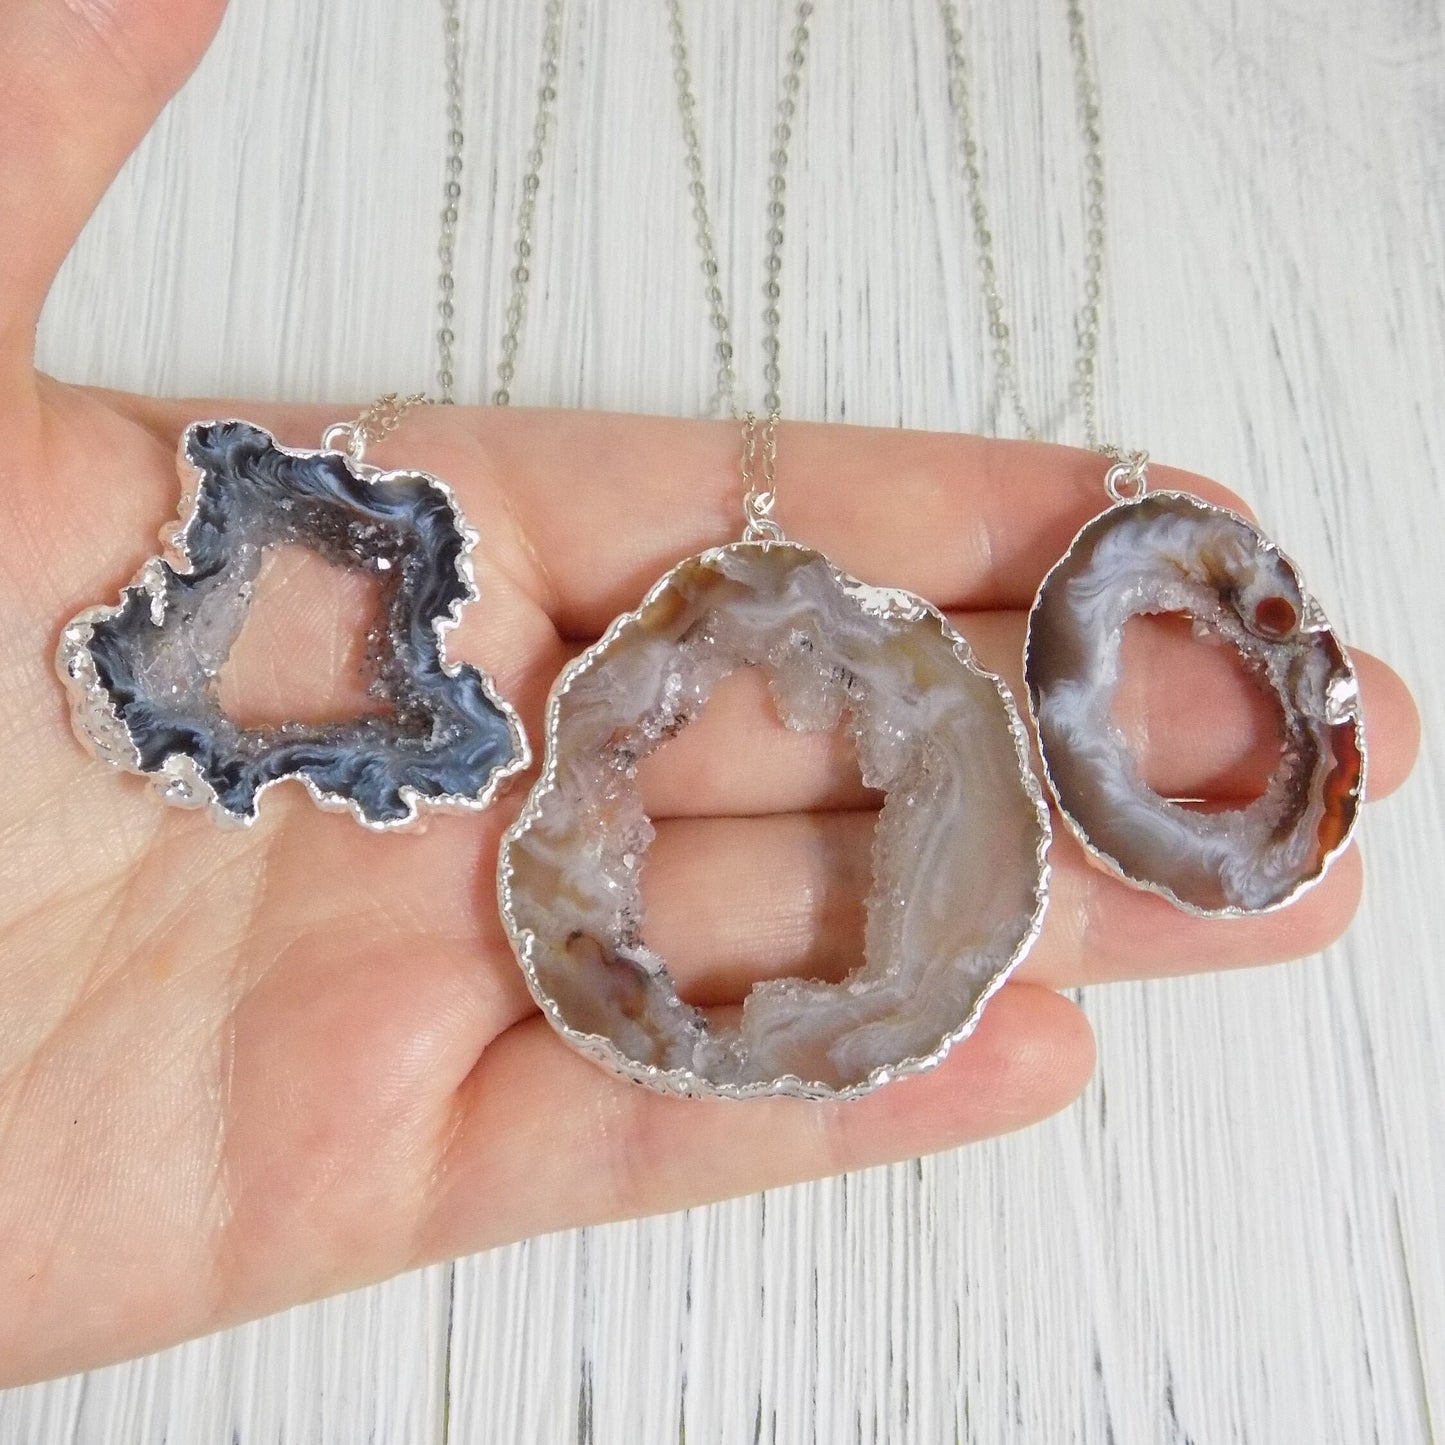 Geode Necklace Silver - Natural Geode Necklace